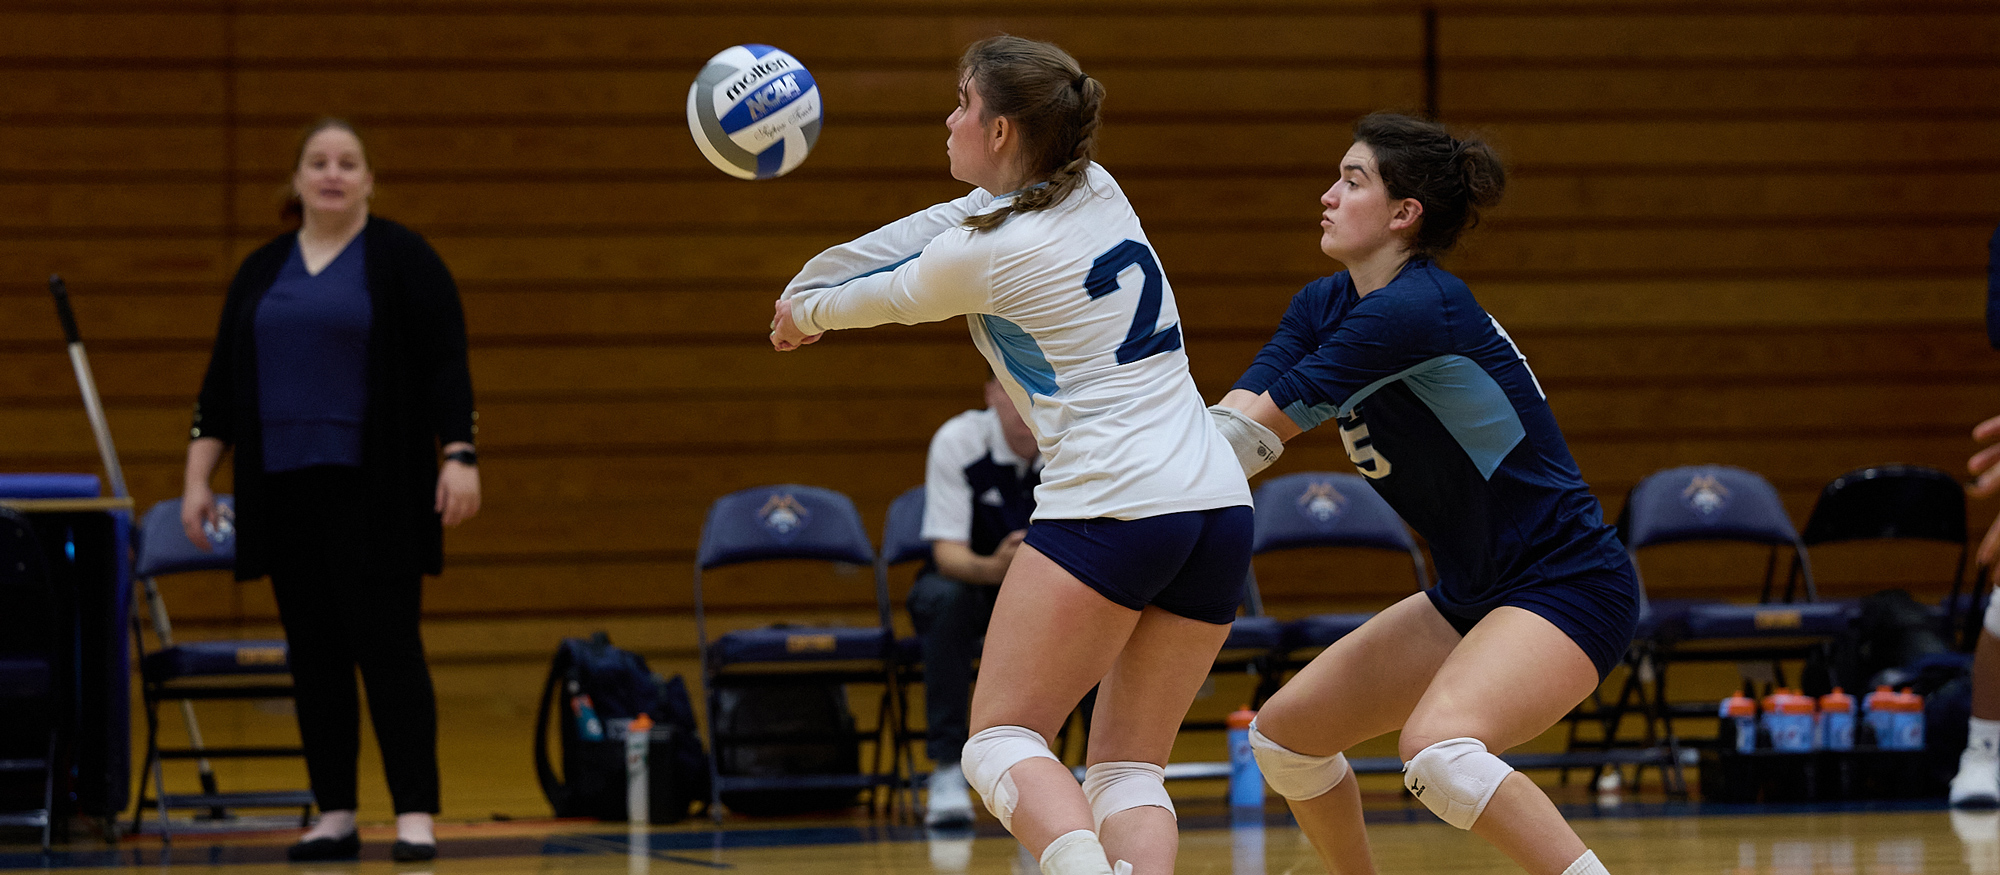 Kyra Staples had a team-high 16 digs in Mount Holyoke's 3-0 loss to Babson on Oct. 3, 2023. (File photo courtesy of Micheal Ringor)